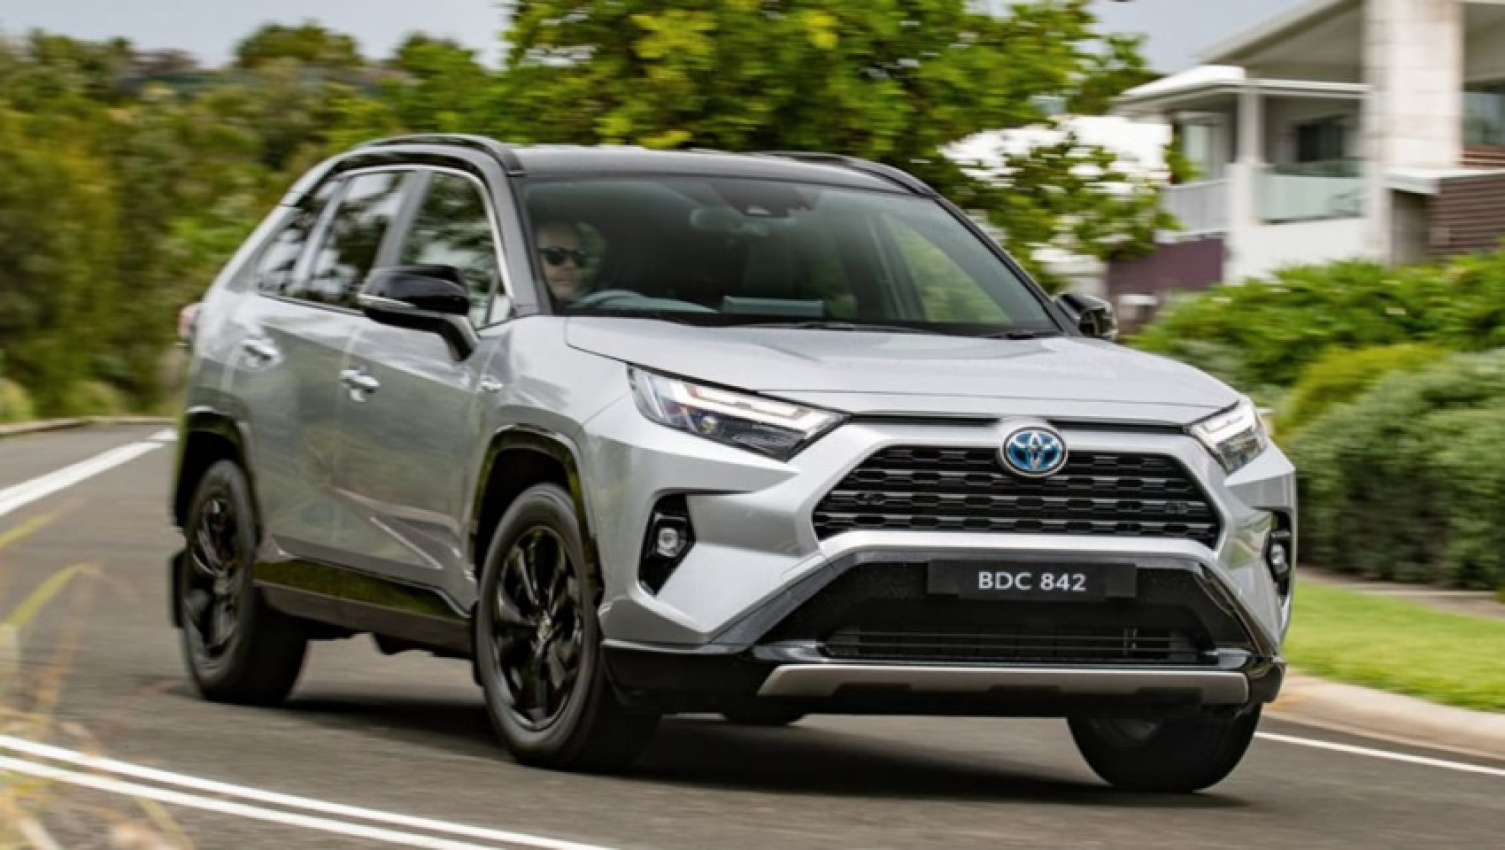 autos, cars, kia, mazda, toyota, hybrid cars, industry news, kia sportage, mazda cx-5, showroom news, technology, toyota news, toyota rav4, toyota rav4 2022, toyota suv range, 2022 toyota rav4 update coming! mazda cx-5, kia sportage suv rival suv to get latest safety and tech features later this year